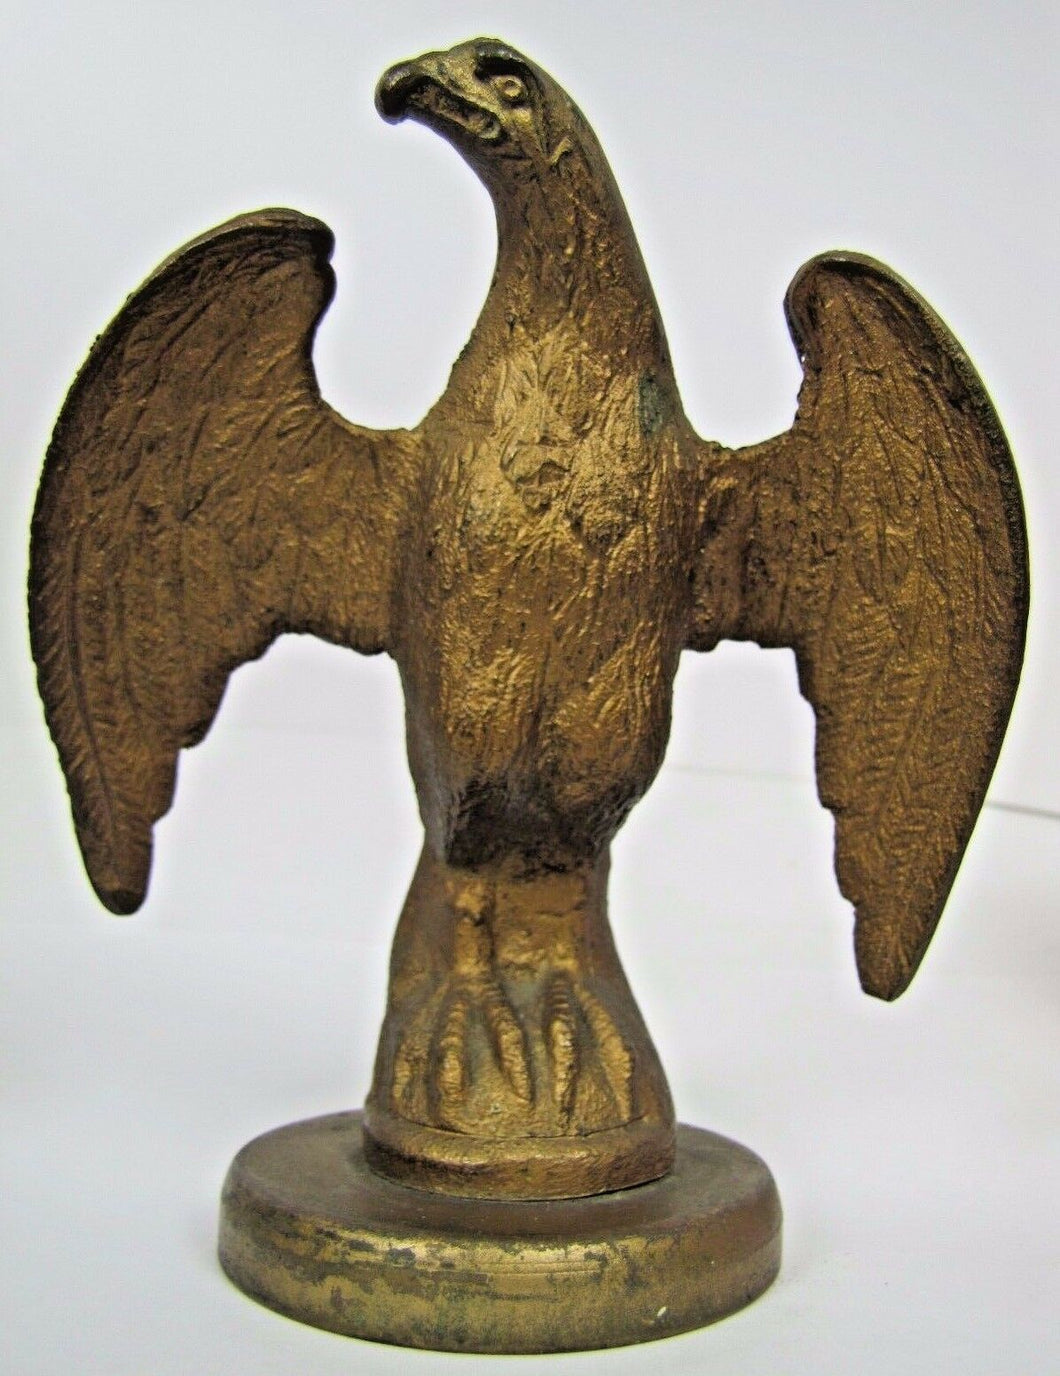 Antique Eagle Brass/Bronze Decorative Art Large Paperweight Architectural Topper